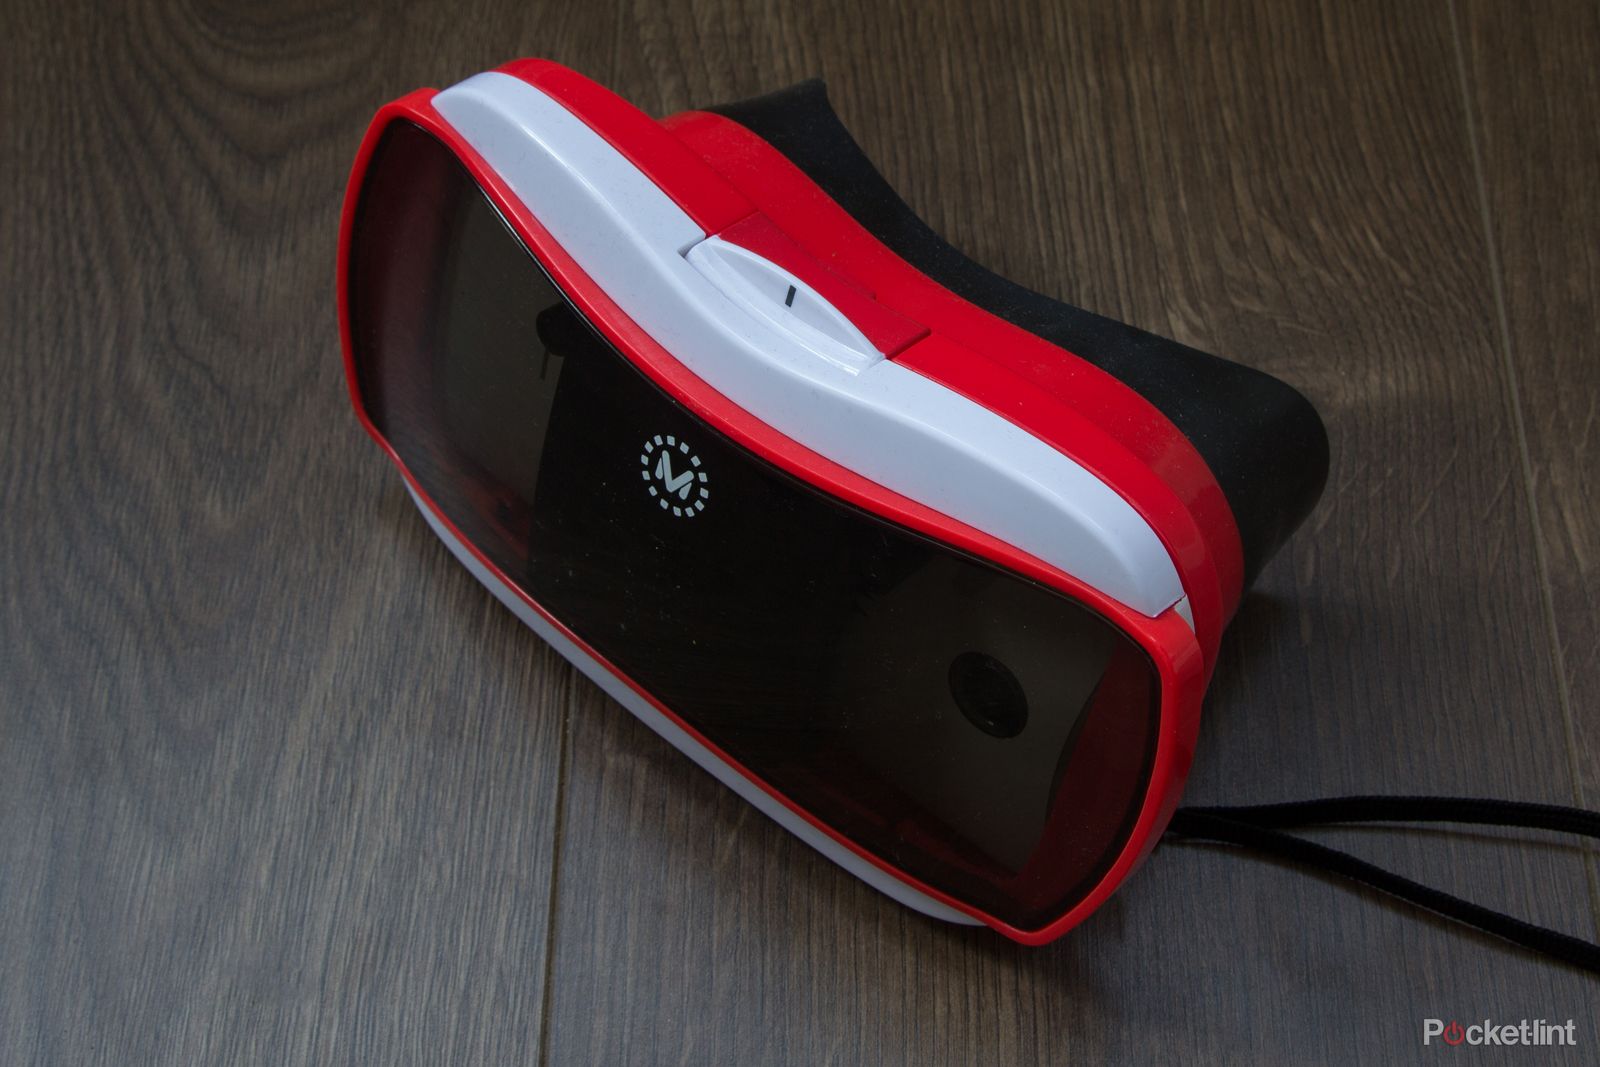 View-Master virtual reality headset review: educational but needs more fun, Children's tech